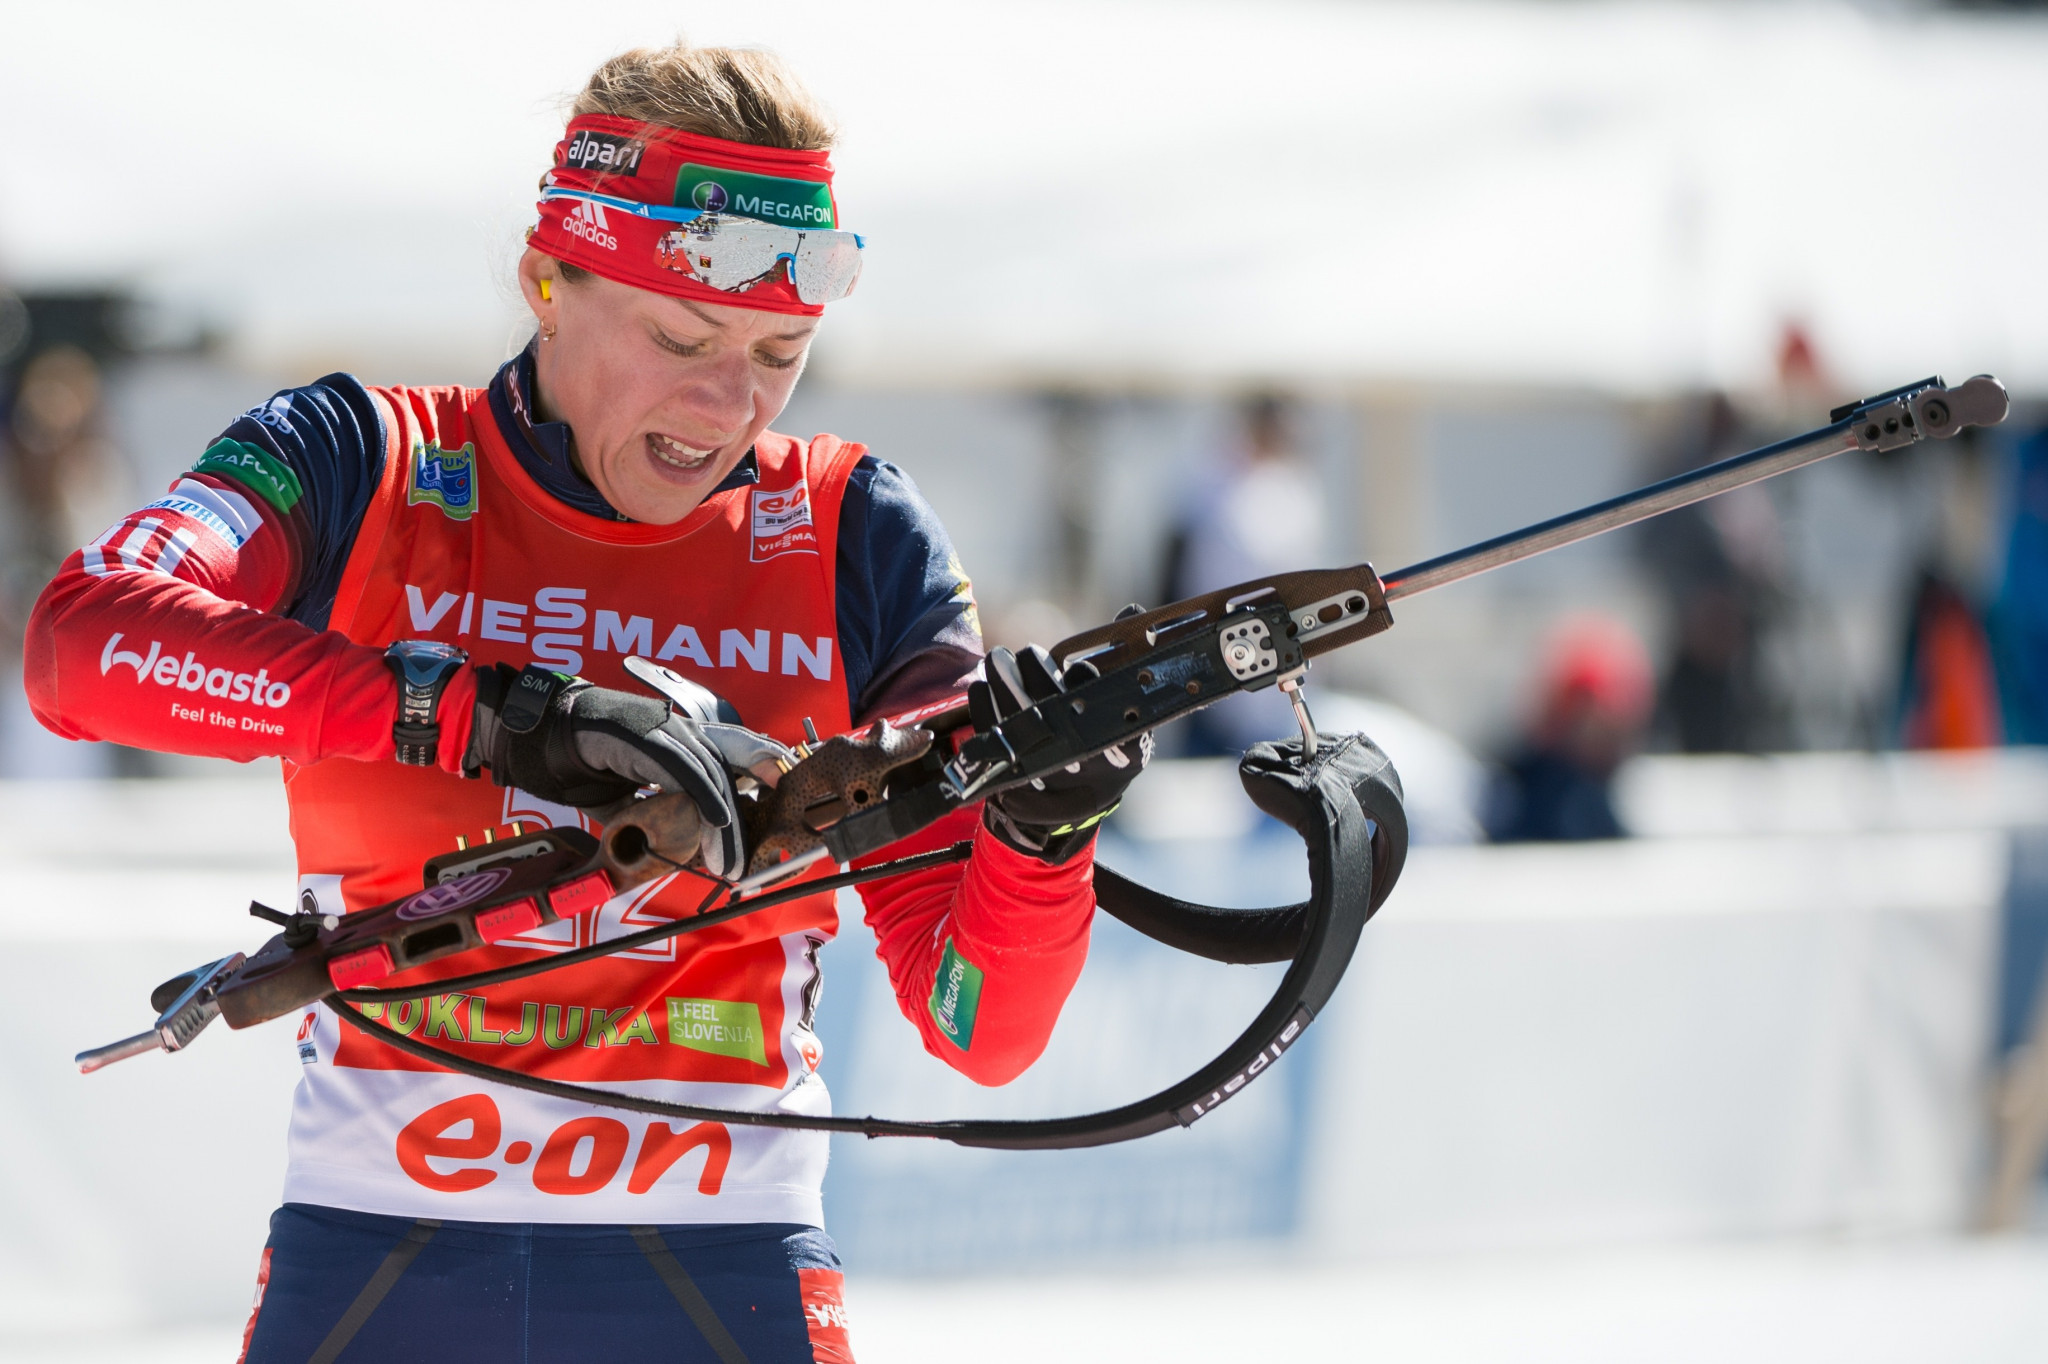 Biathlon medals at Sochi 2014 reallocated by IOC after Zaitseva disqualification